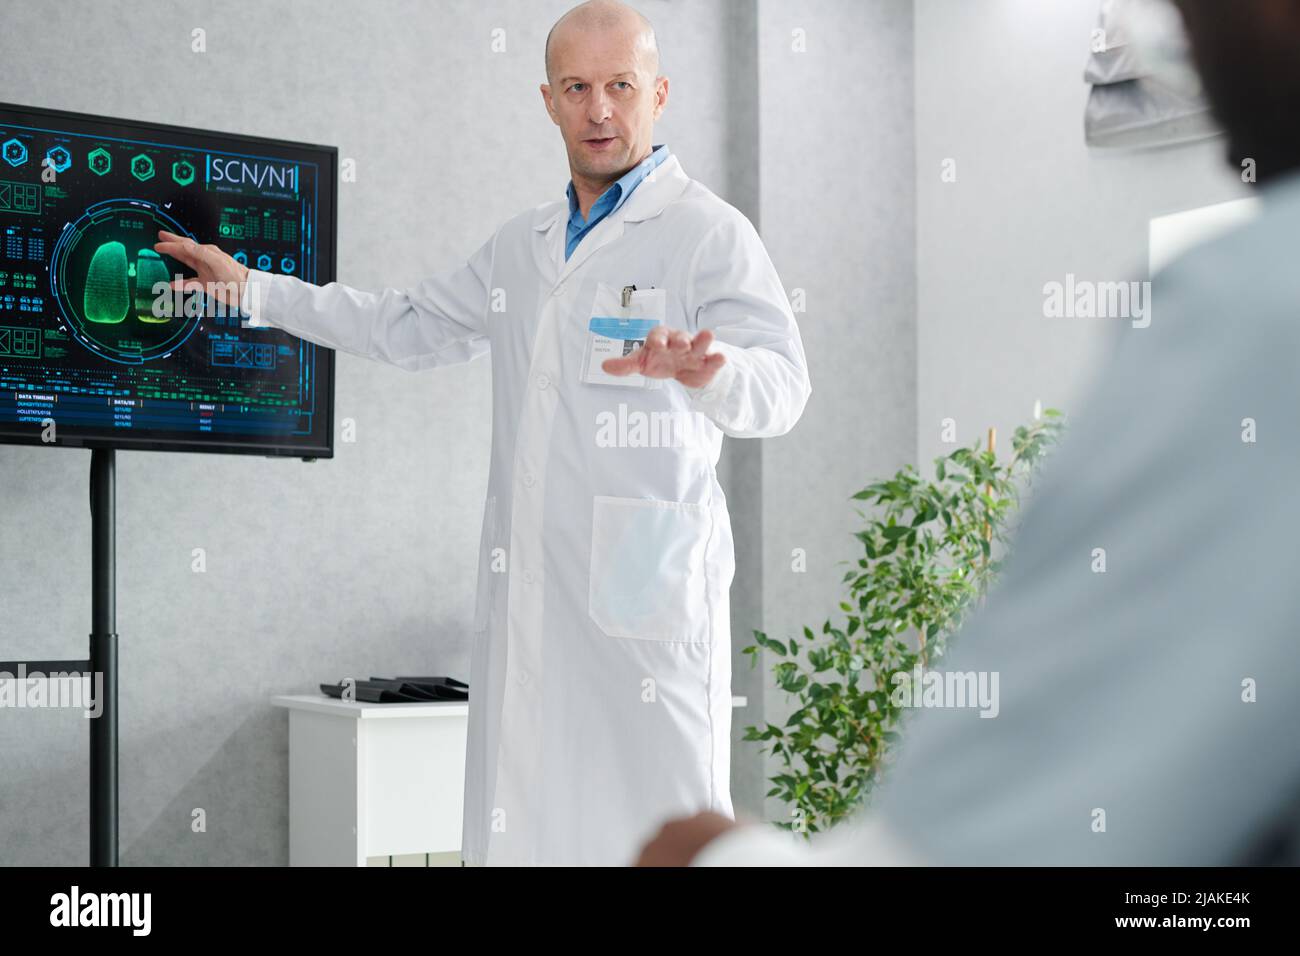 Mature doctor in white coat pointing at digital display with charts and talking to students during training Stock Photo